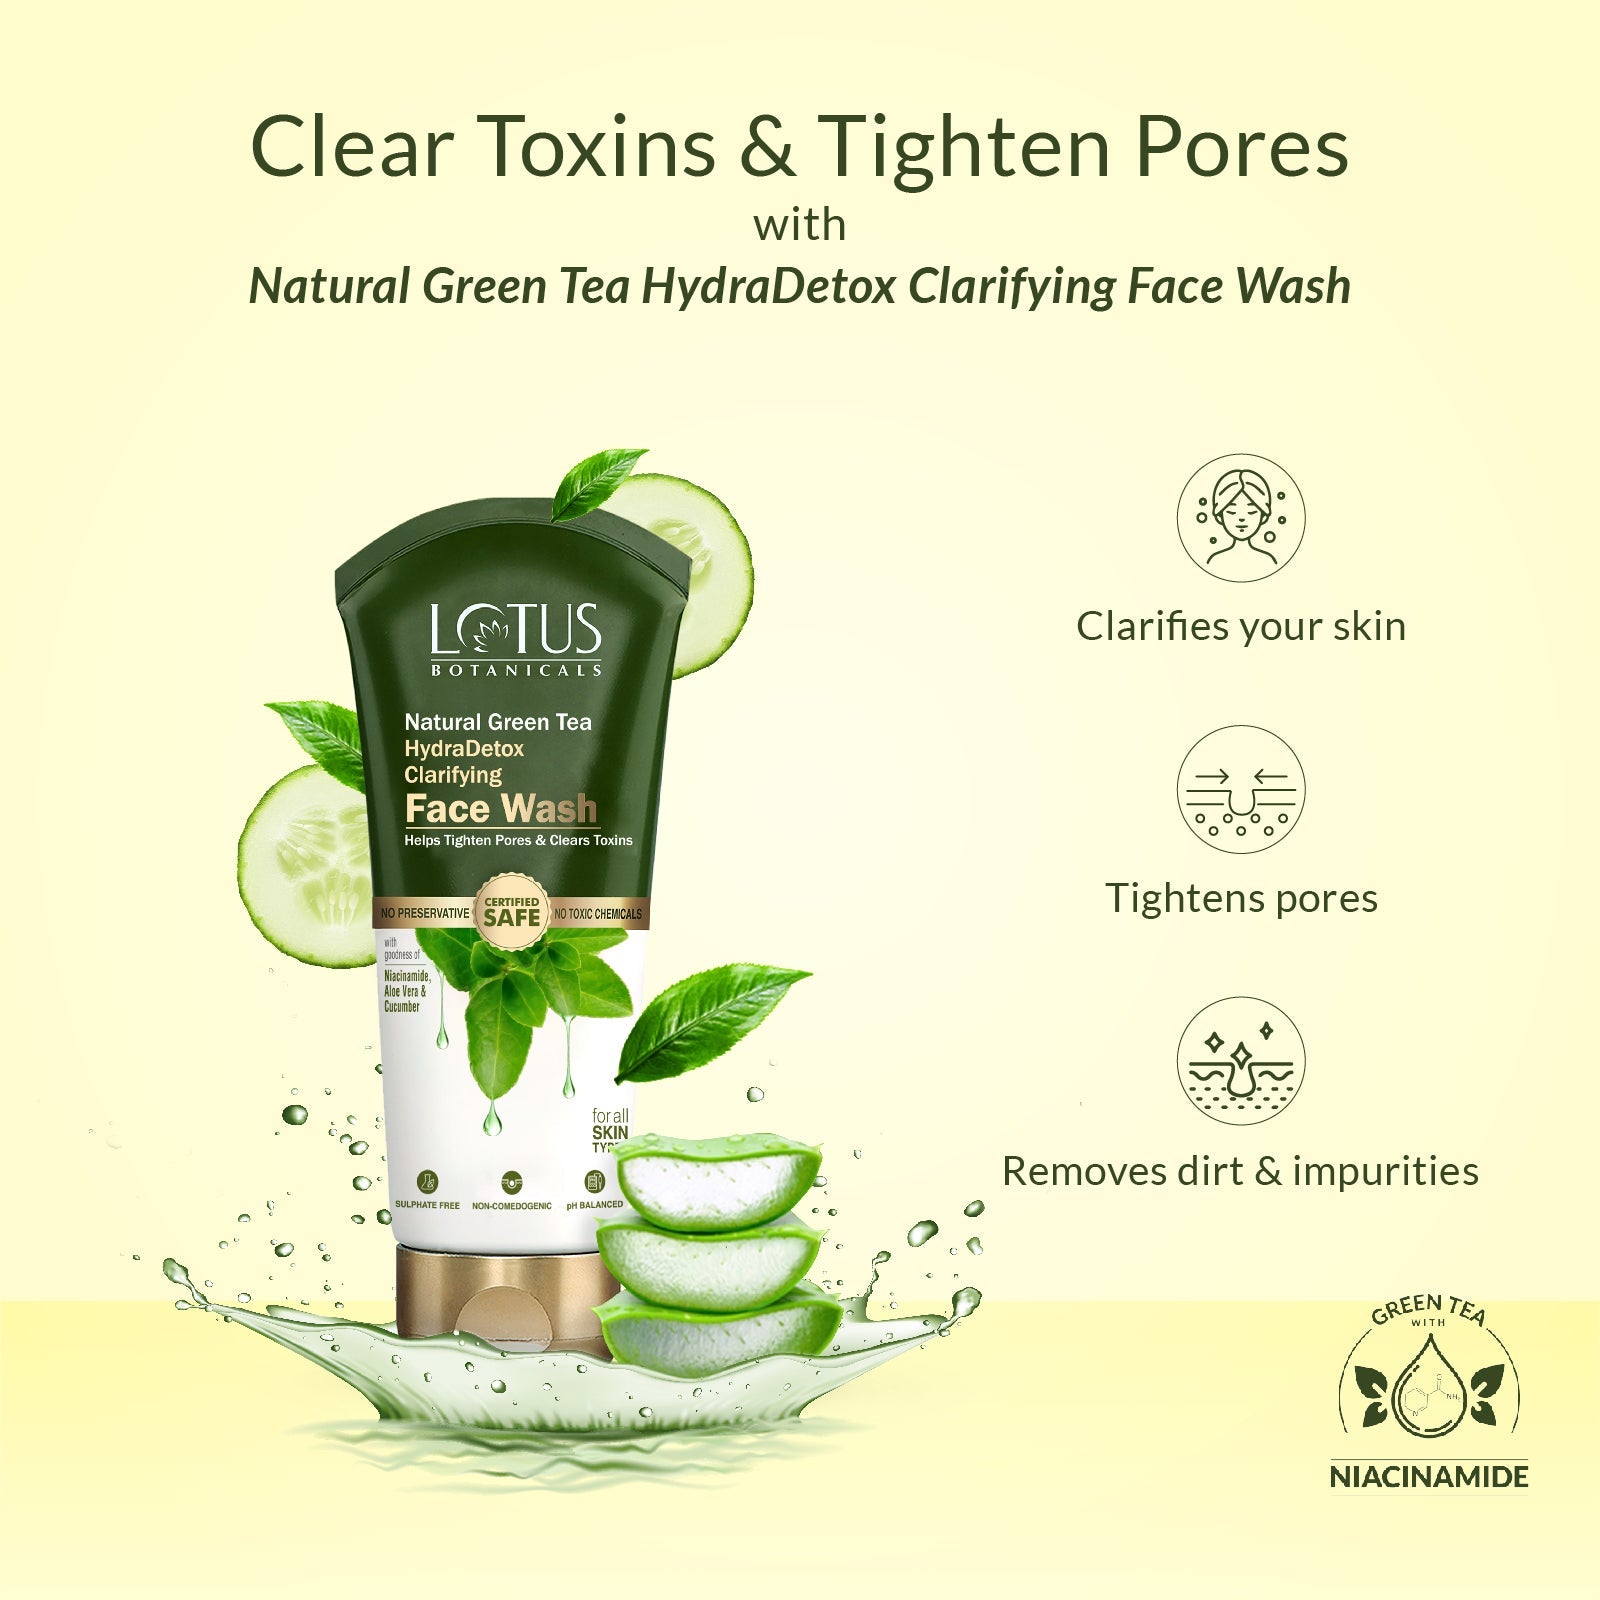 Refreshing and purifying face wash with natural green tea extracts for a detoxifying and hydrating experience